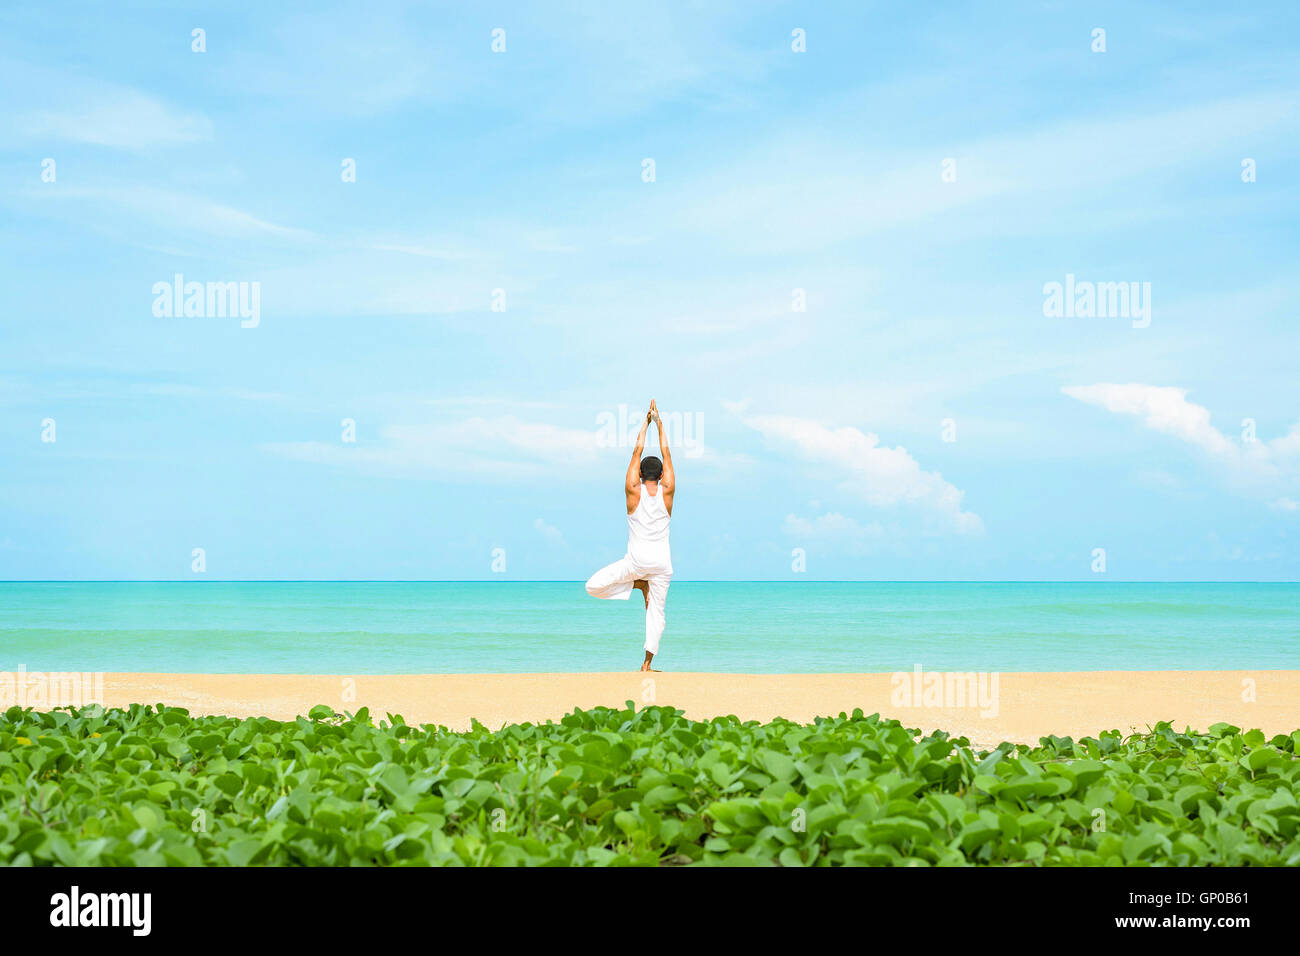 a man practicing yoga on the beautiful beach and tropical seashore, Ipomoea foreground. Stock Photo